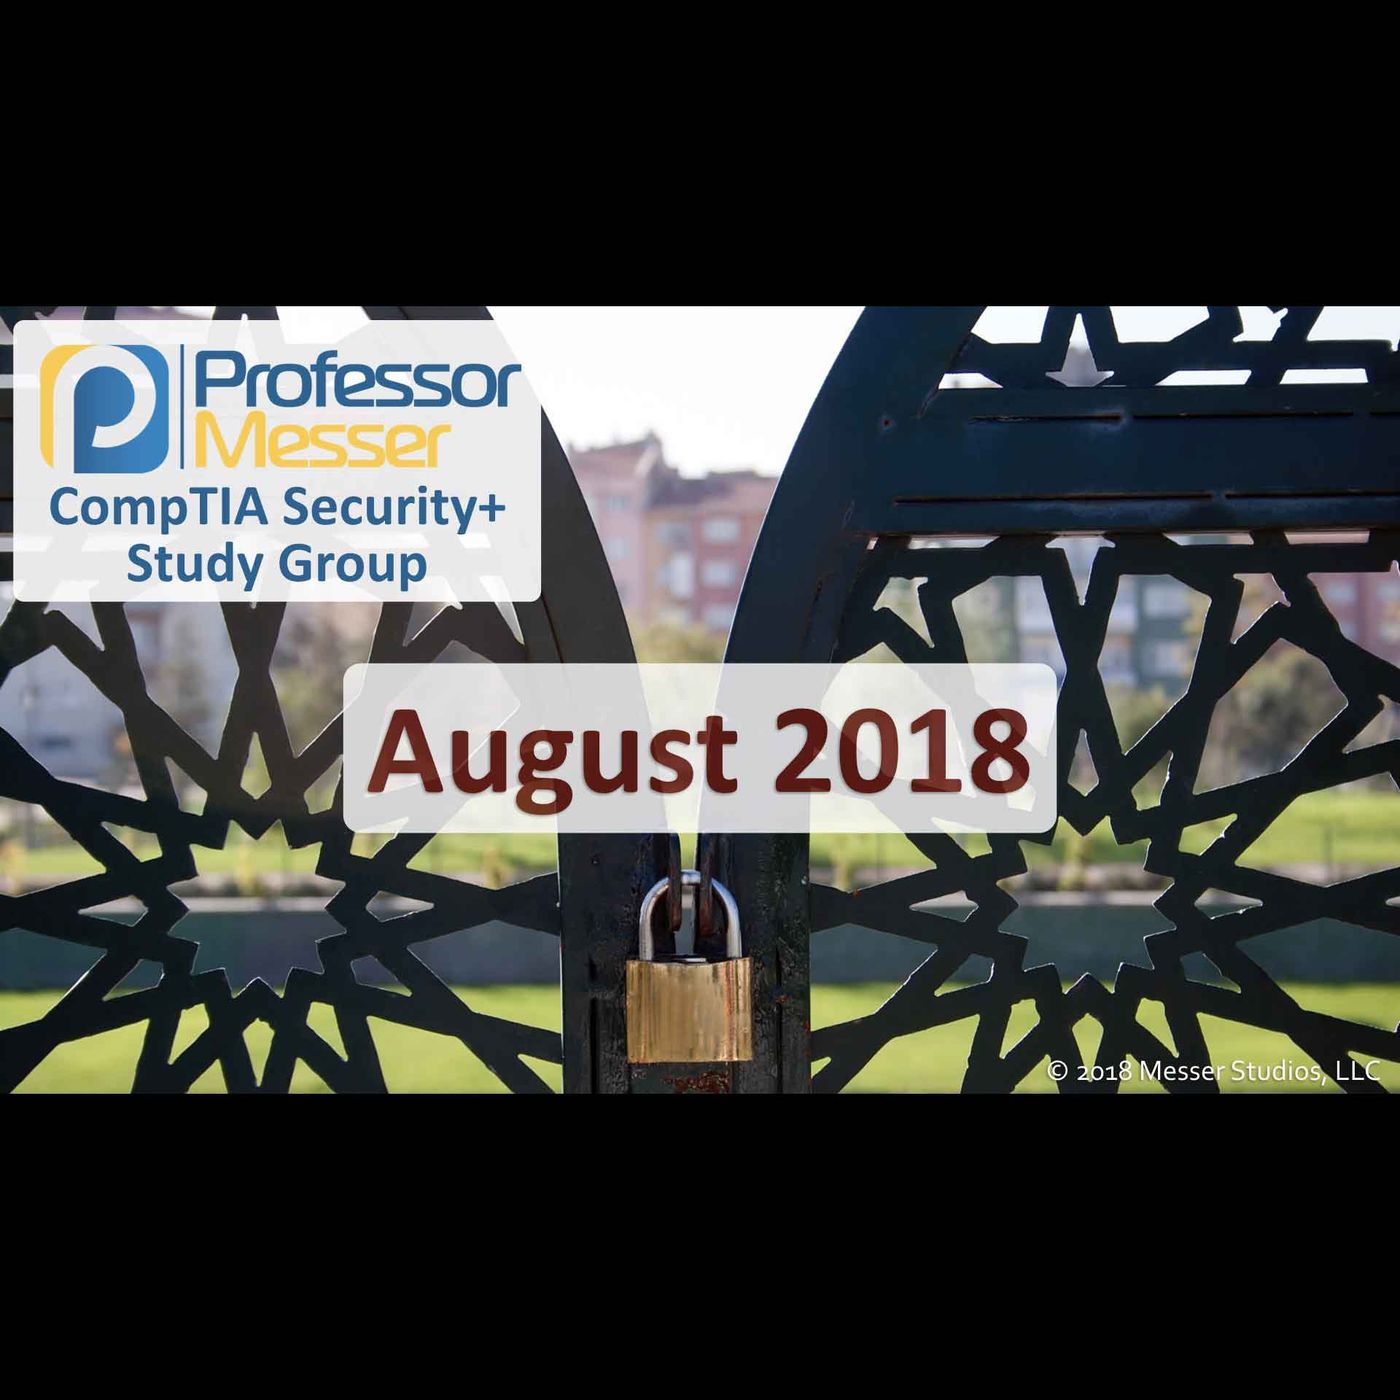 Professor Messer's Security+ Study Group - August 2018